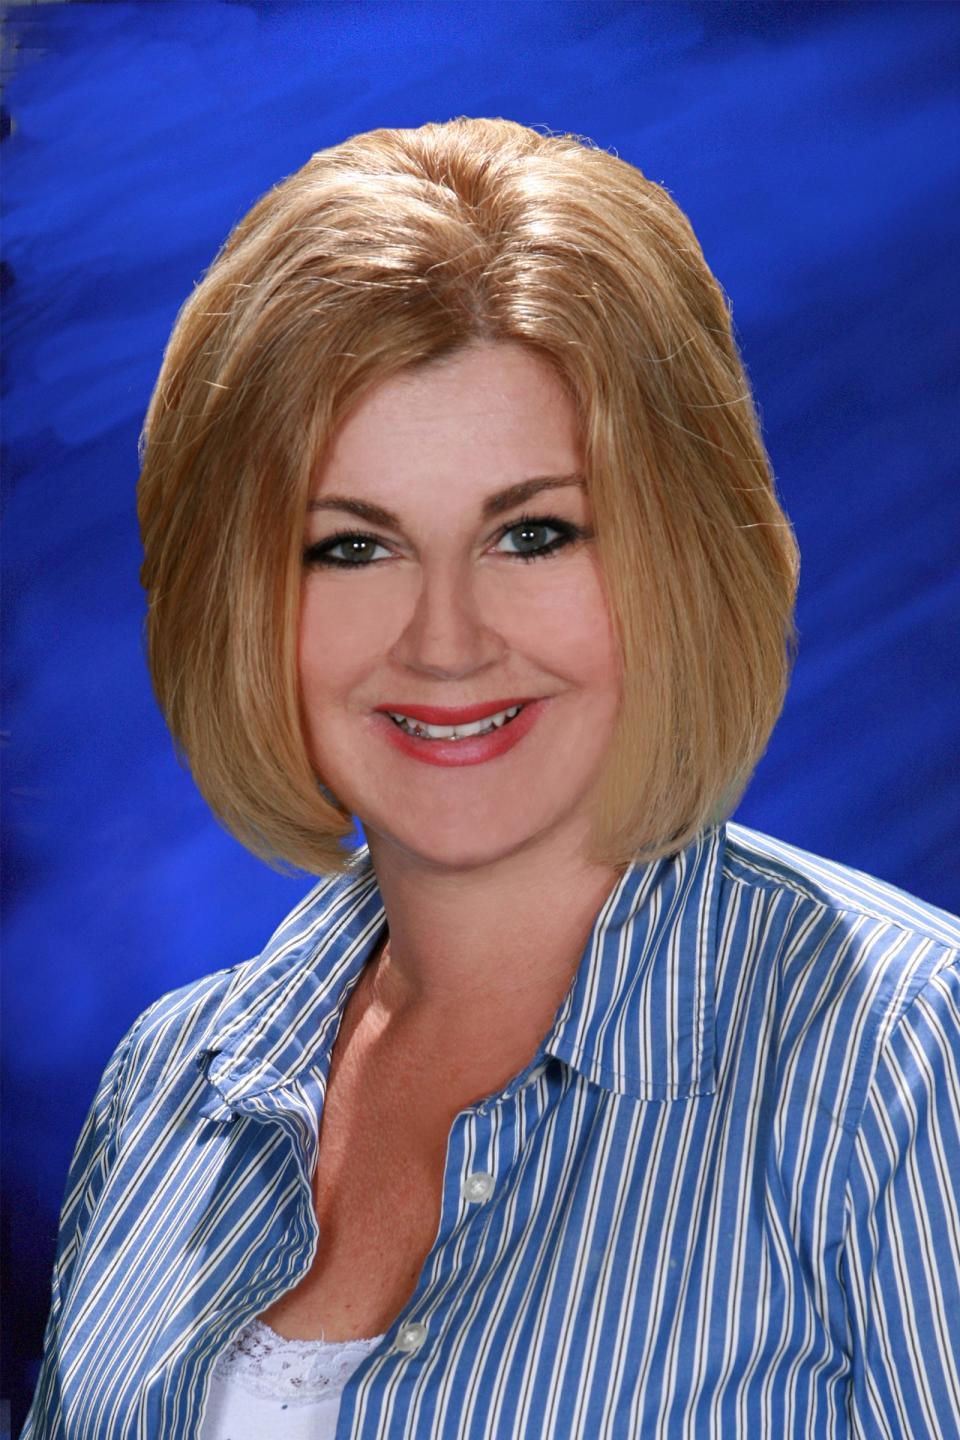 Brenda Lyle is a Certified Care Manager for One Senior Place in Viera.